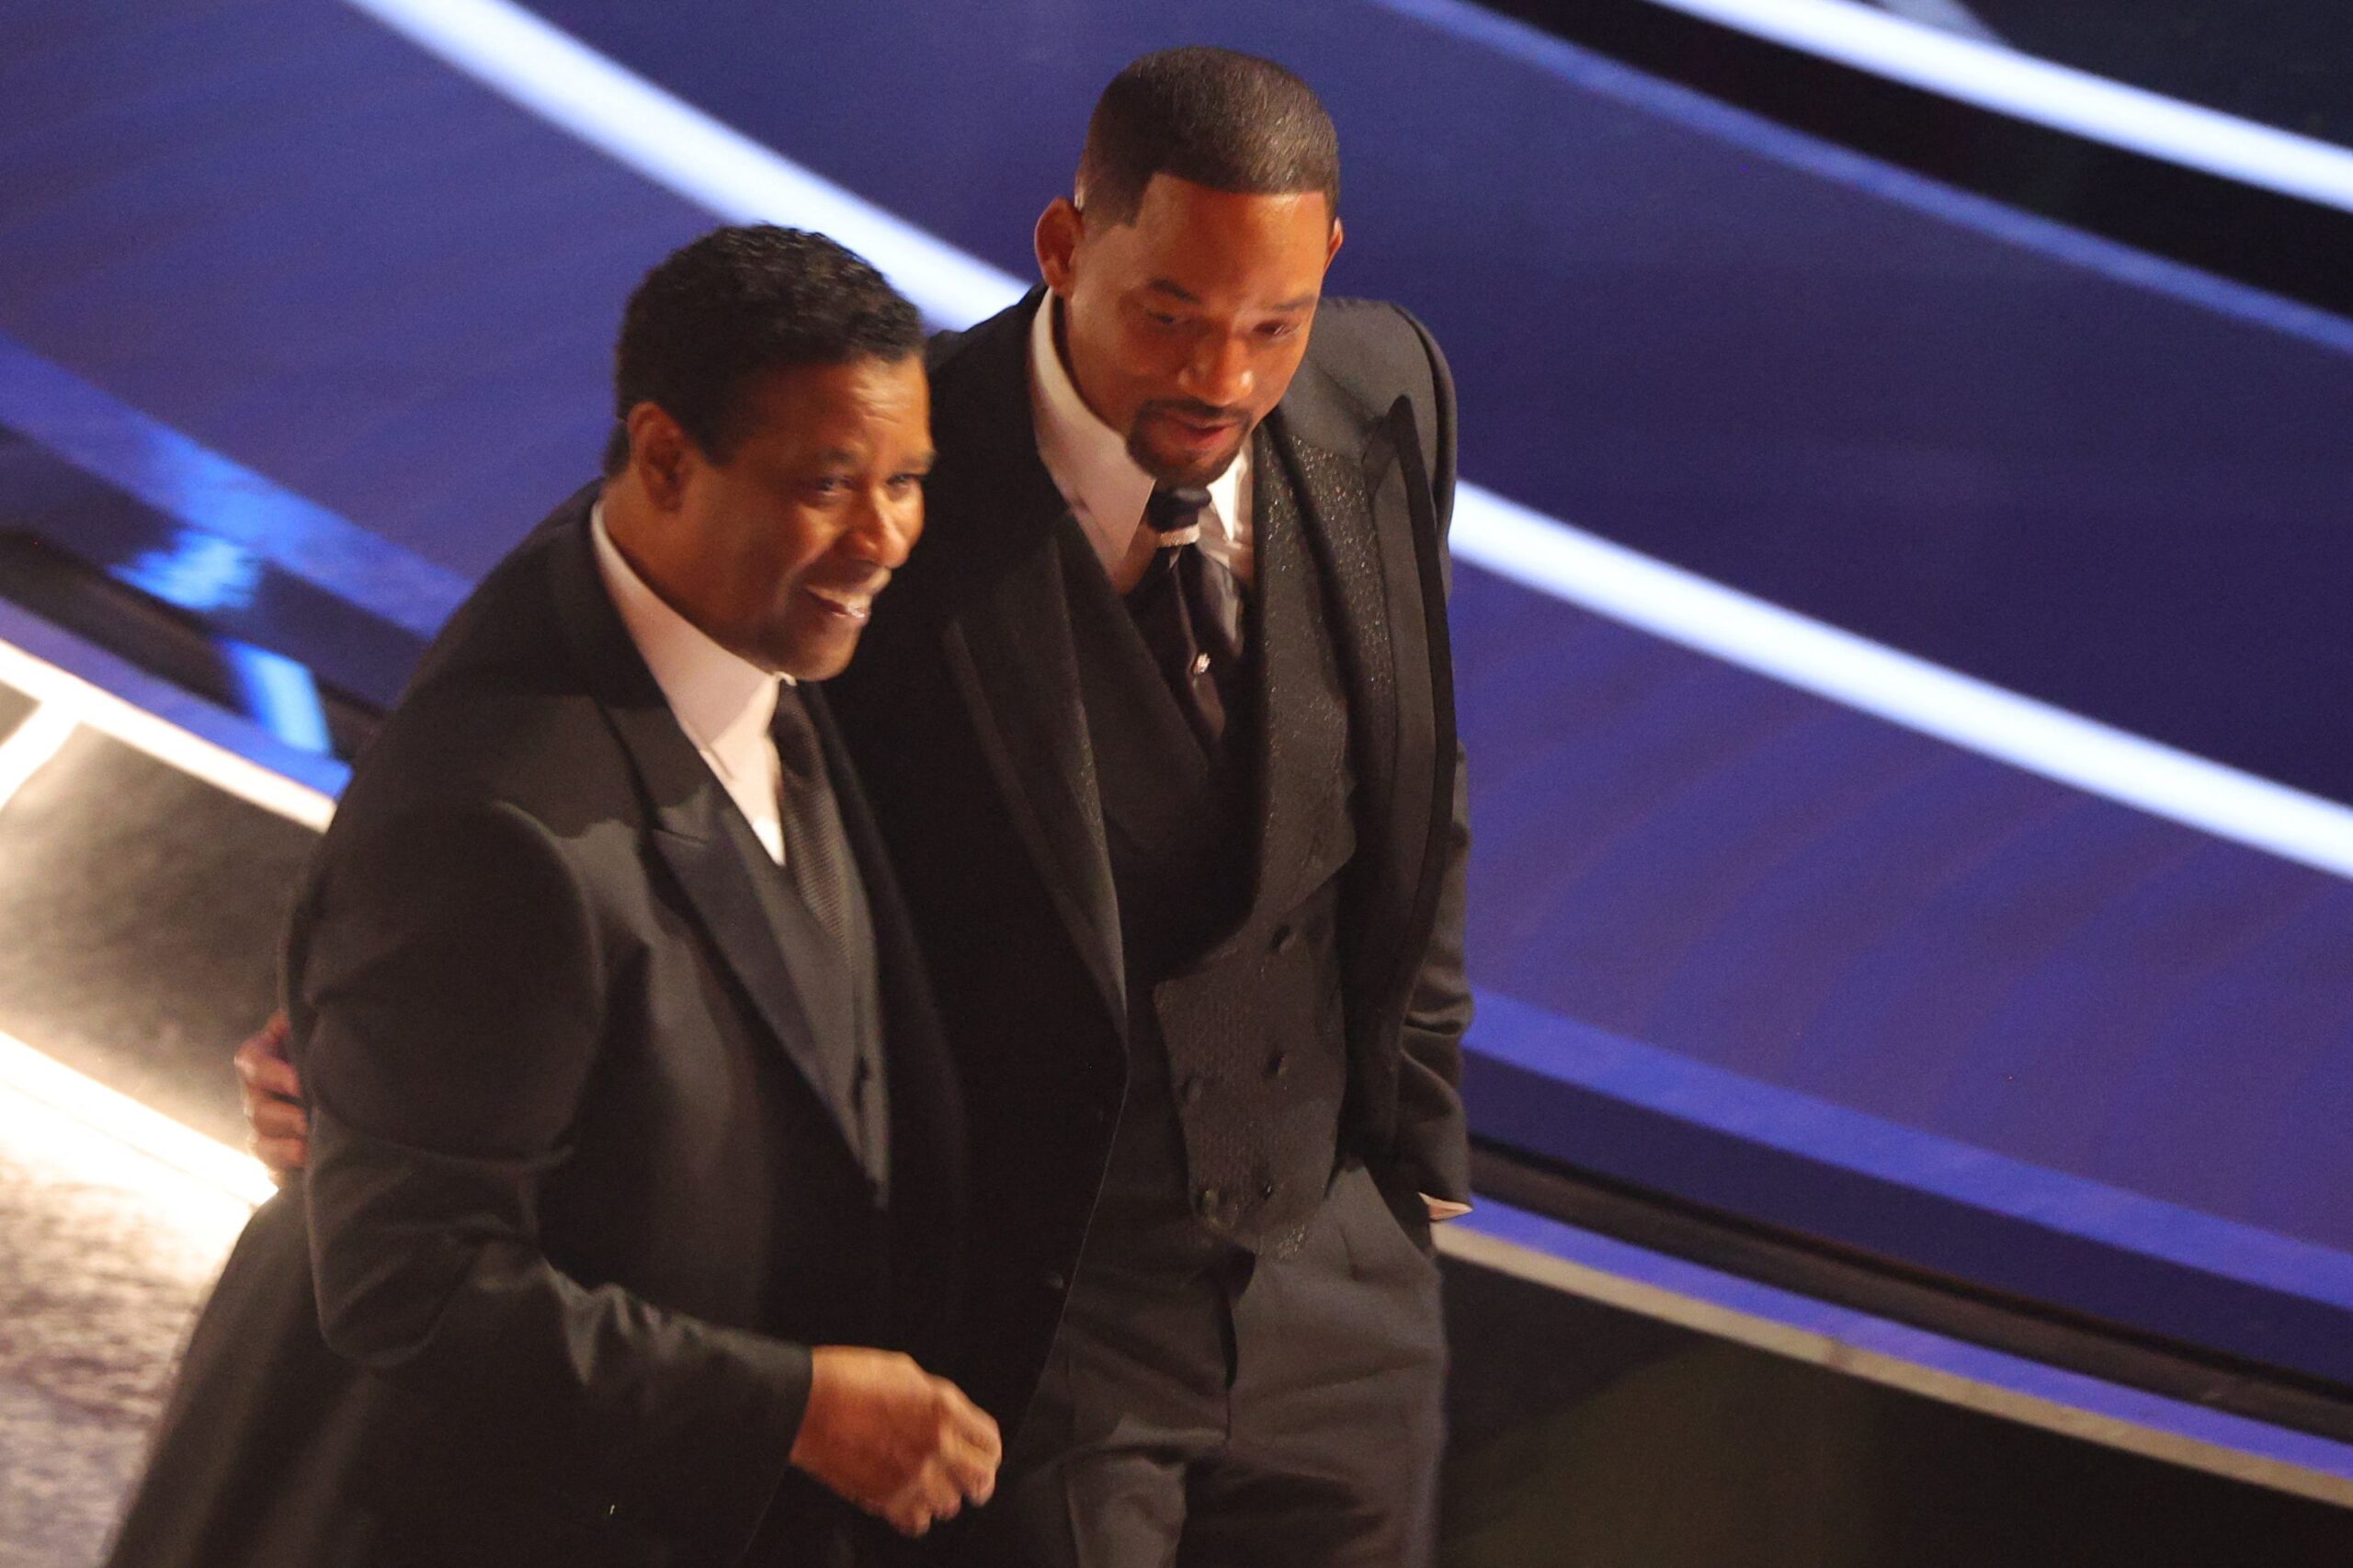 Denzel Washington walks with Will Smith after he hit Chris Rock